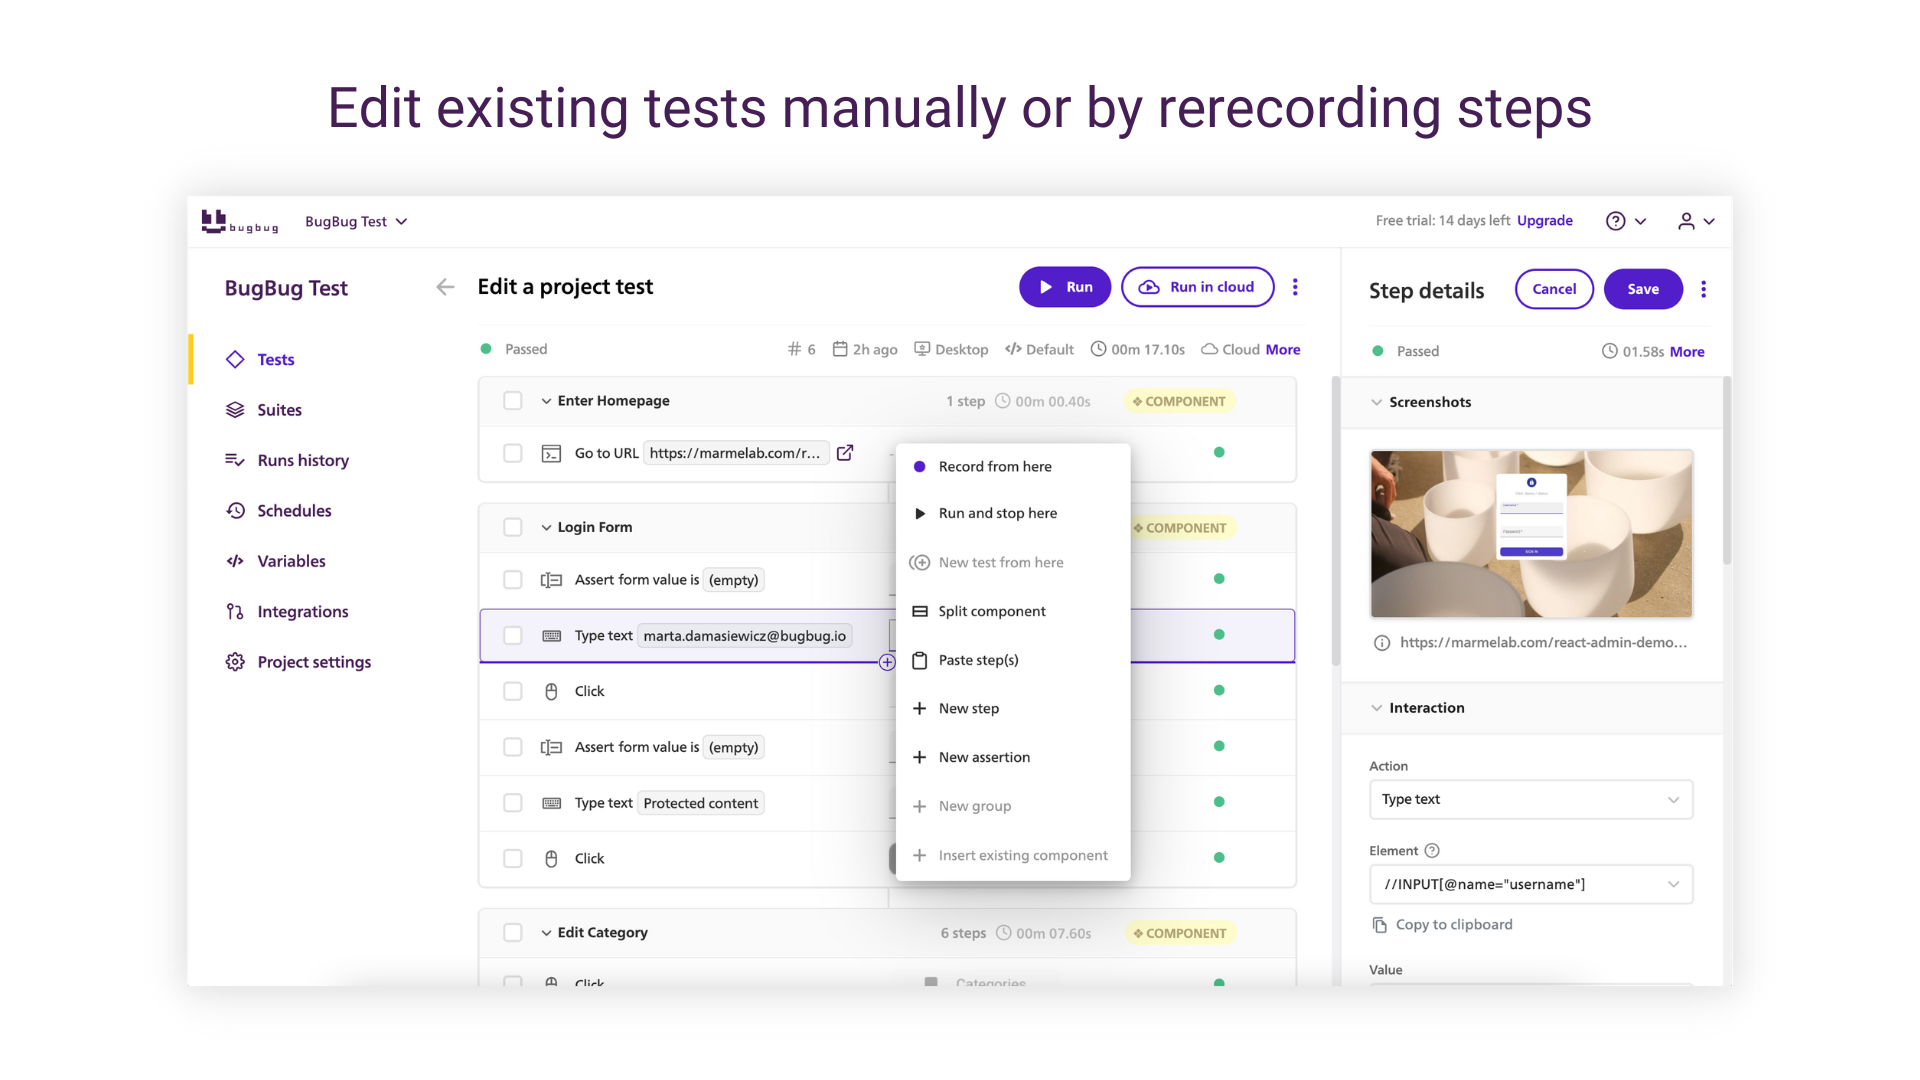 Edit existing tests manually or by recording new steps